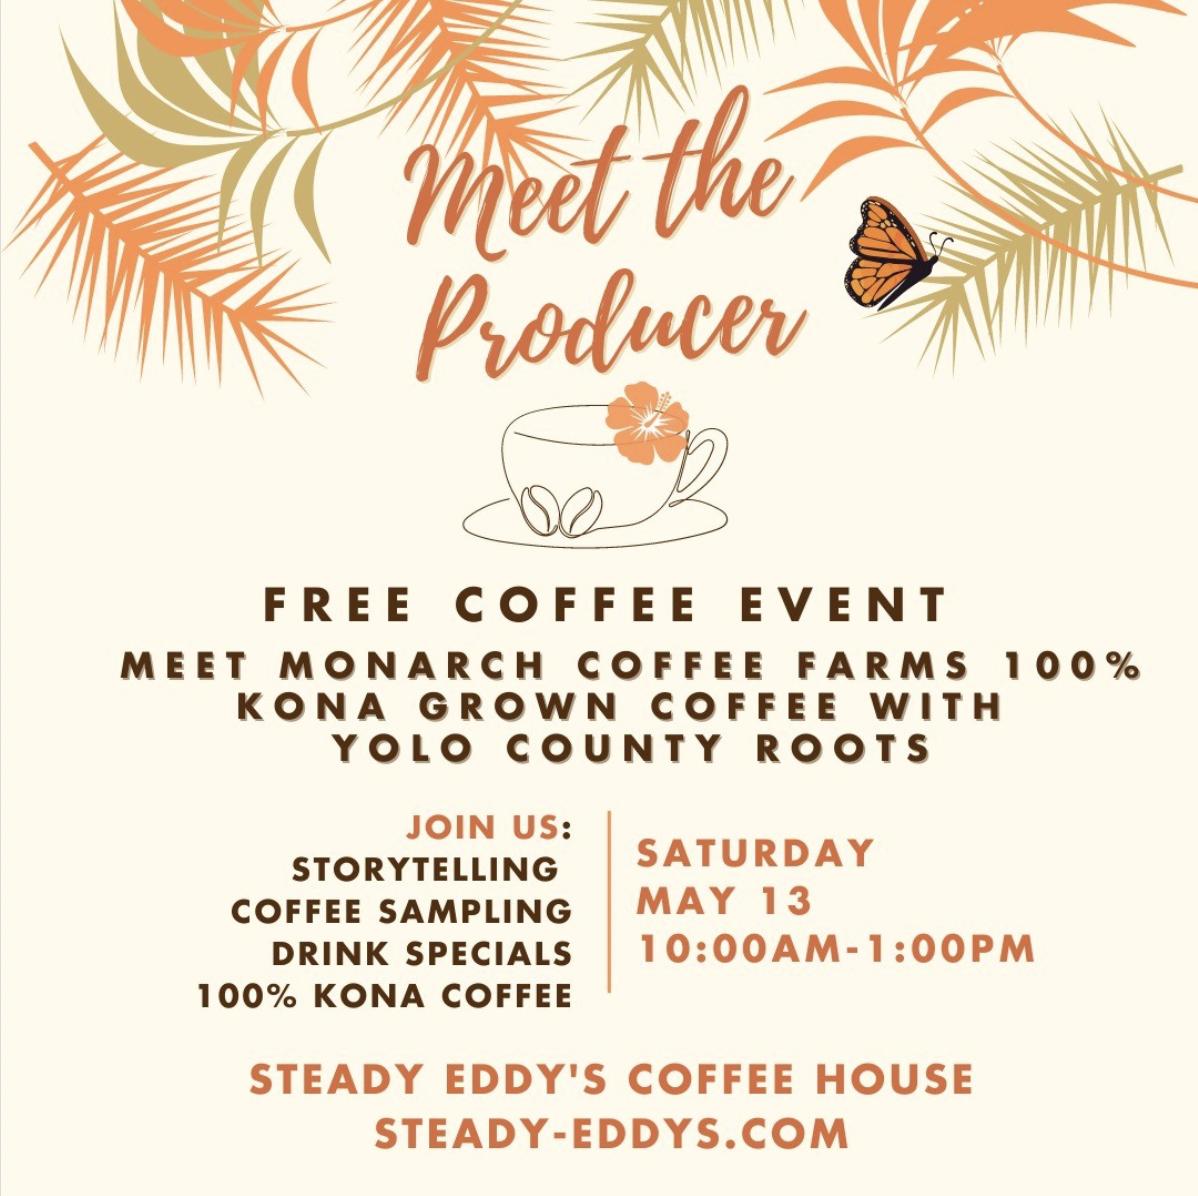 Free coffee for events